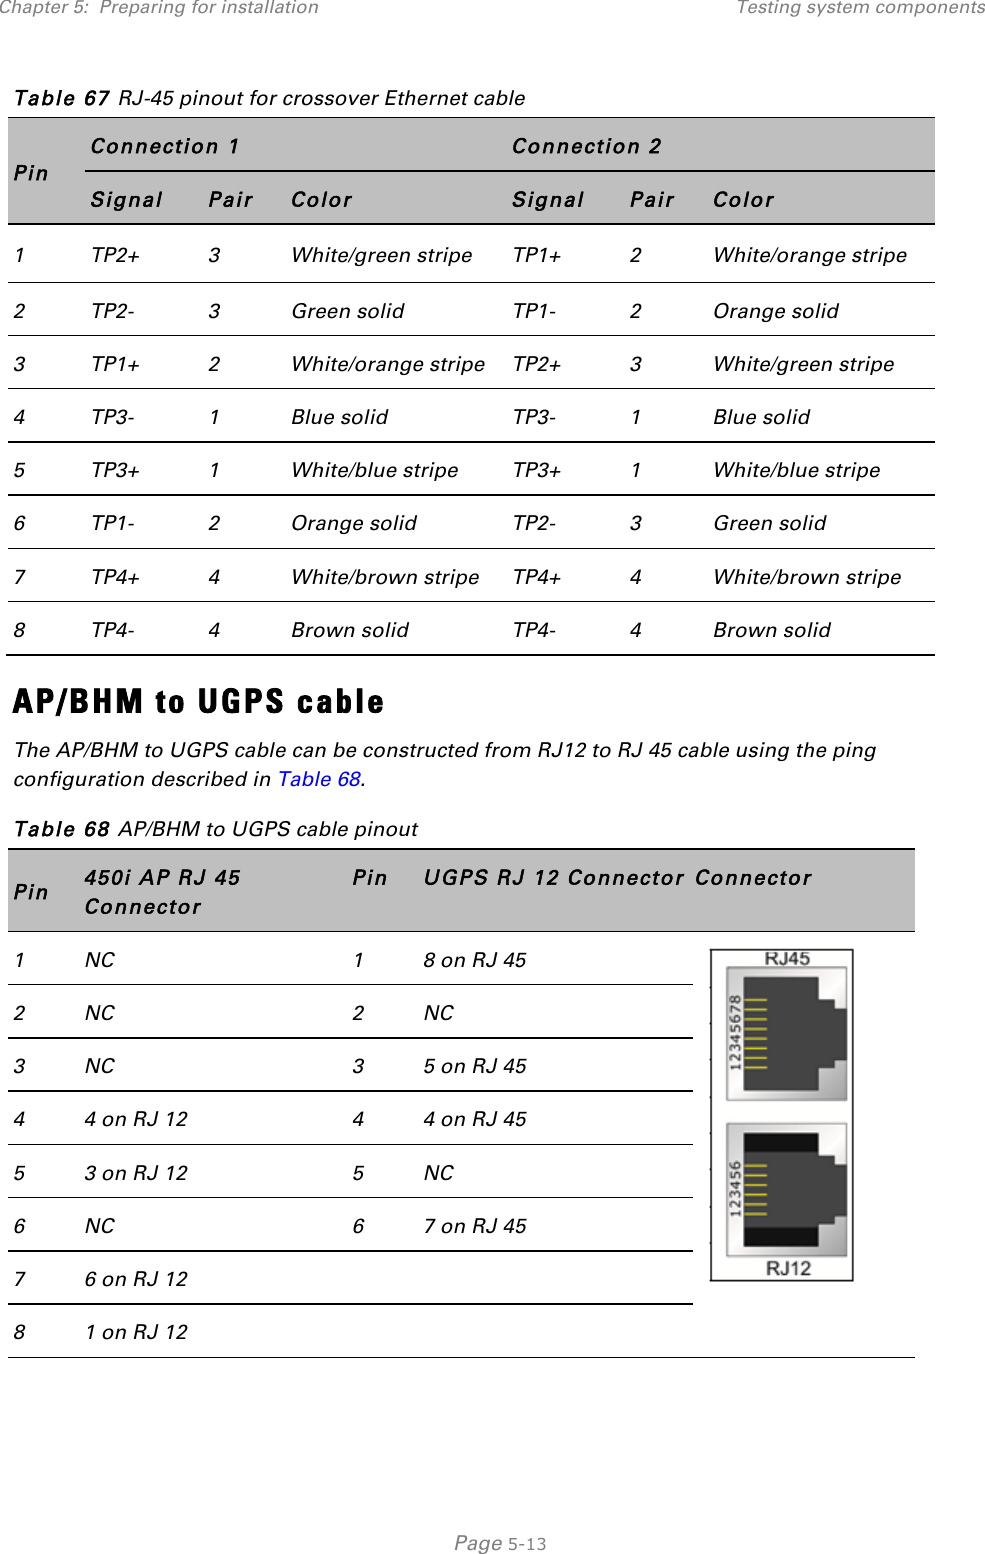 Chapter 5:  Preparing for installation Testing system components   Page 5-13 Table 67 RJ-45 pinout for crossover Ethernet cable Pin Connection 1 Connection 2 Signal Pair Color Signal Pair Color 1 TP2+ 3 White/green stripe TP1+ 2 White/orange stripe 2 TP2- 3 Green solid TP1- 2 Orange solid 3 TP1+ 2 White/orange stripe TP2+ 3 White/green stripe 4 TP3- 1 Blue solid TP3- 1 Blue solid 5 TP3+ 1 White/blue stripe TP3+ 1 White/blue stripe 6 TP1- 2 Orange solid TP2- 3 Green solid 7 TP4+ 4 White/brown stripe TP4+ 4 White/brown stripe 8 TP4- 4 Brown solid TP4- 4 Brown solid AP/BHM to UGPS cable The AP/BHM to UGPS cable can be constructed from RJ12 to RJ 45 cable using the ping configuration described in Table 68. Table 68 AP/BHM to UGPS cable pinout Pin 450i AP RJ 45 Connector Pin UGPS RJ 12 Connector Connector 1 NC 1 8 on RJ 45  2 NC 2 NC 3 NC 3 5 on RJ 45 4 4 on RJ 12 4 4 on RJ 45 5 3 on RJ 12 5 NC 6 NC 6 7 on RJ 45 7 6 on RJ 12   8 1 on RJ 12    